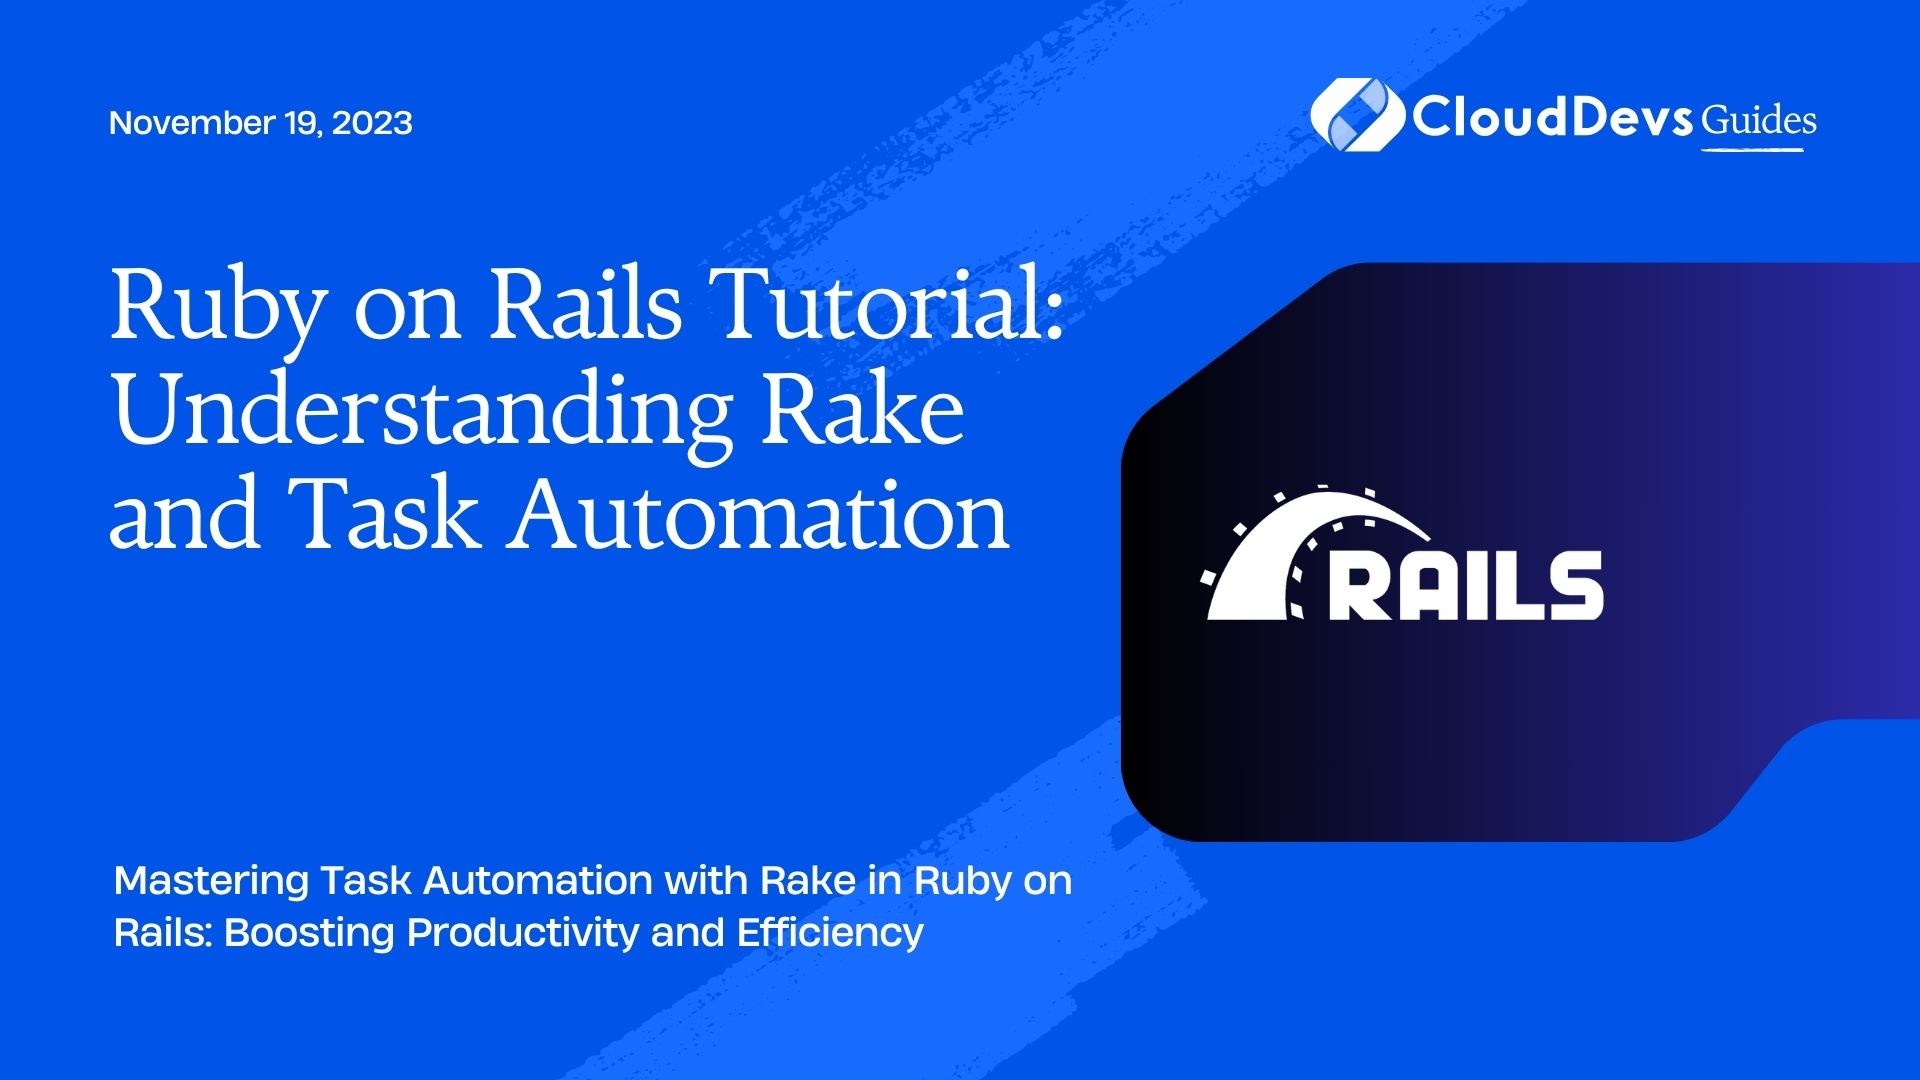 Ruby on Rails Tutorial: Understanding Rake and Task Automation